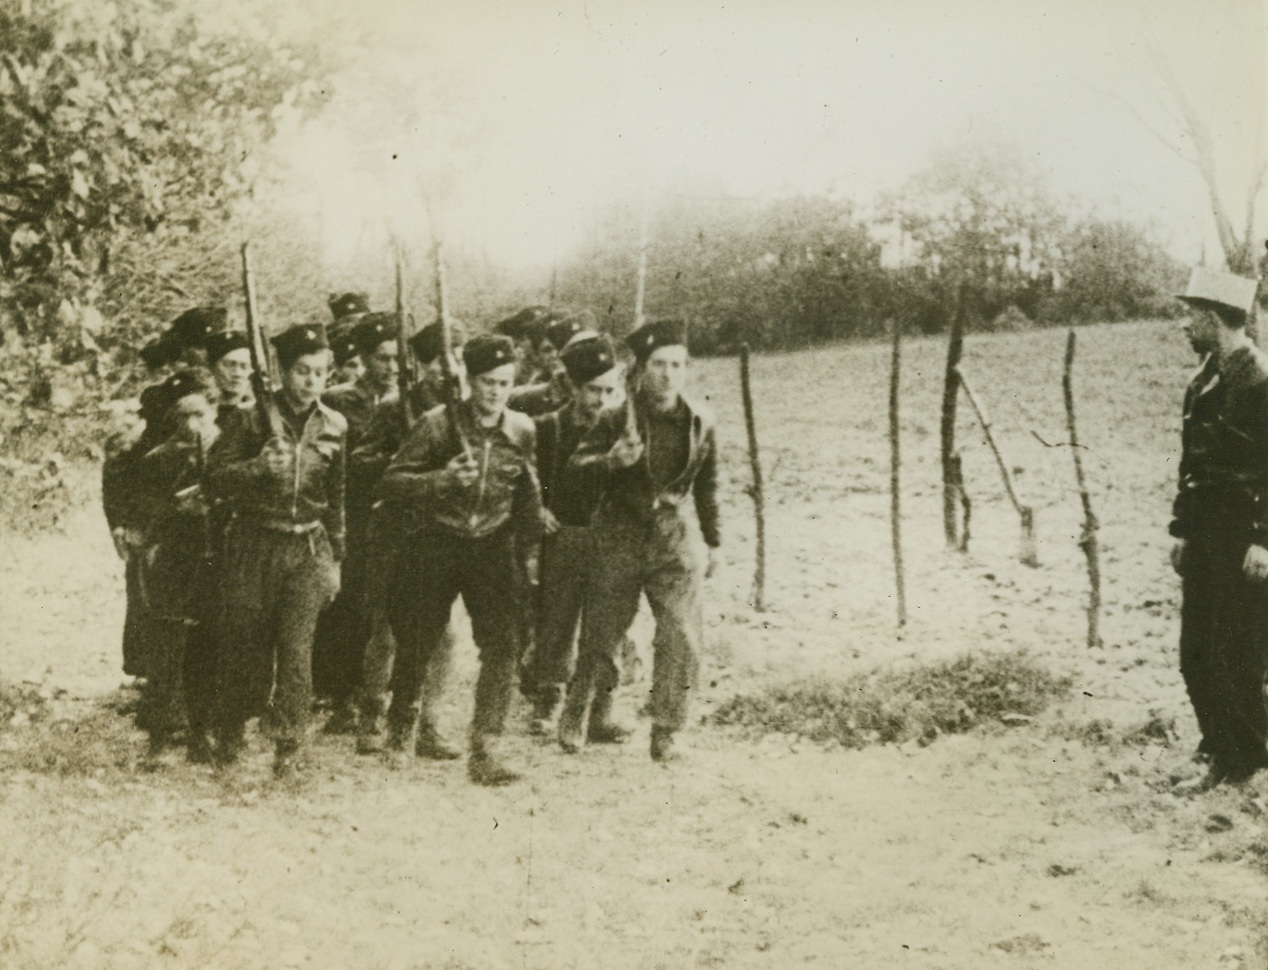 First Photos of French Underground, 3/13/1944. This photo, smuggled out of France and which just reached the U.S., is from a movie film made at one of the secret bases of the Maquis—French guerillas of the Underground who are fighting in the Savoy mountain regions. This is one of the first photos ever to reach the U.S. of the routine life of the guerillas before Darnand, the Himmler of France, launched his main attack on them early last February. These Maquis have forced the Germans to keep 6,000 troops in the Haute Savoie district, and are laying a solid foundation of offensive aid for the coming Allied invasion. Here, former cavalrymen drill on foot at a Maquis base. For security reasons, and to make food supplies easier, patriots are divided into small groups. Credit: ACME;